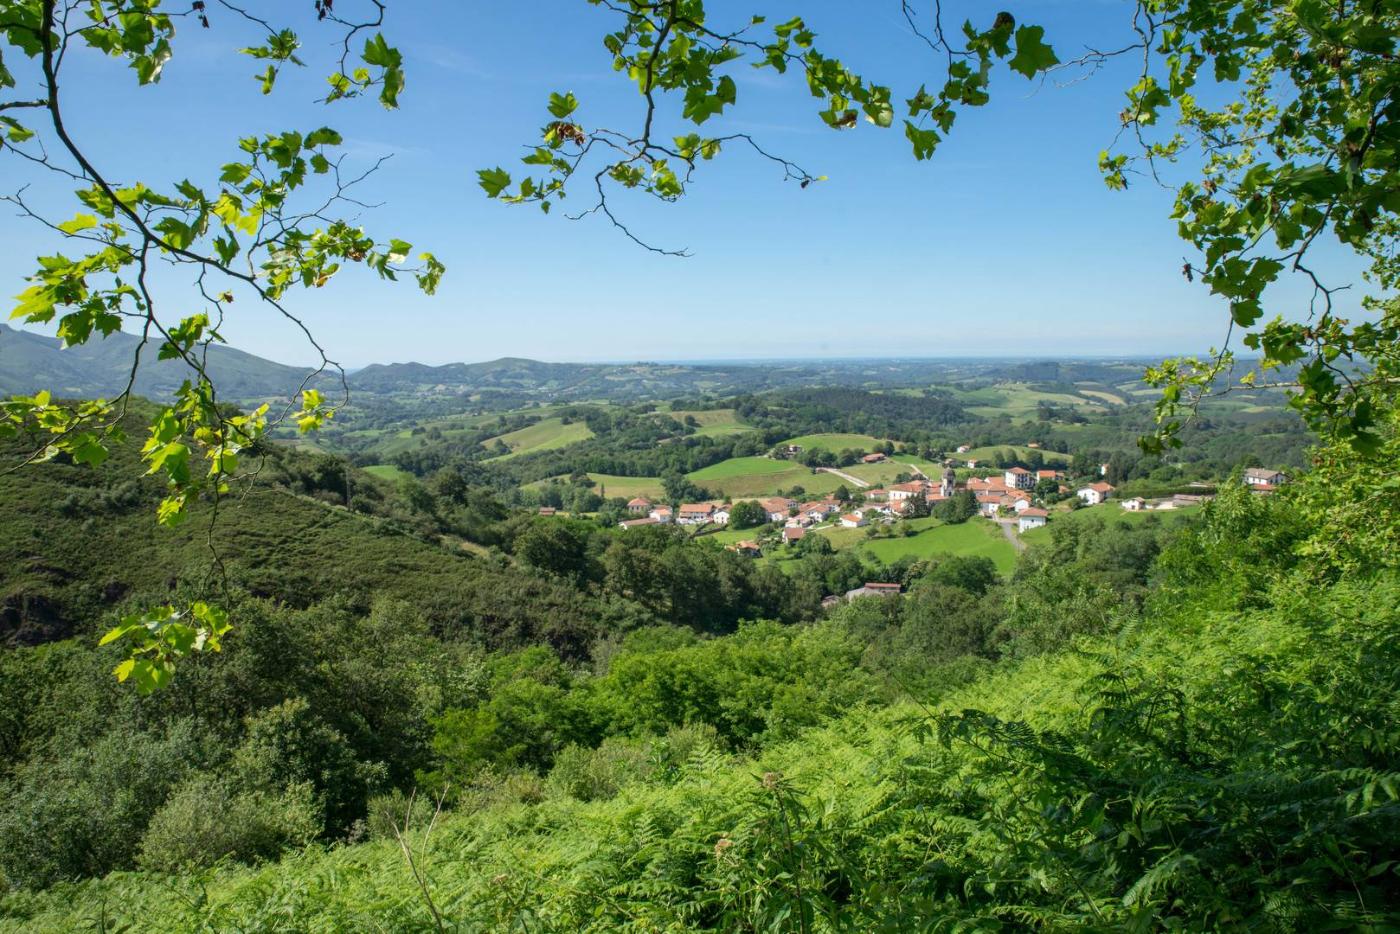 Panoramic view of the village and landscape of the Baztan Valley